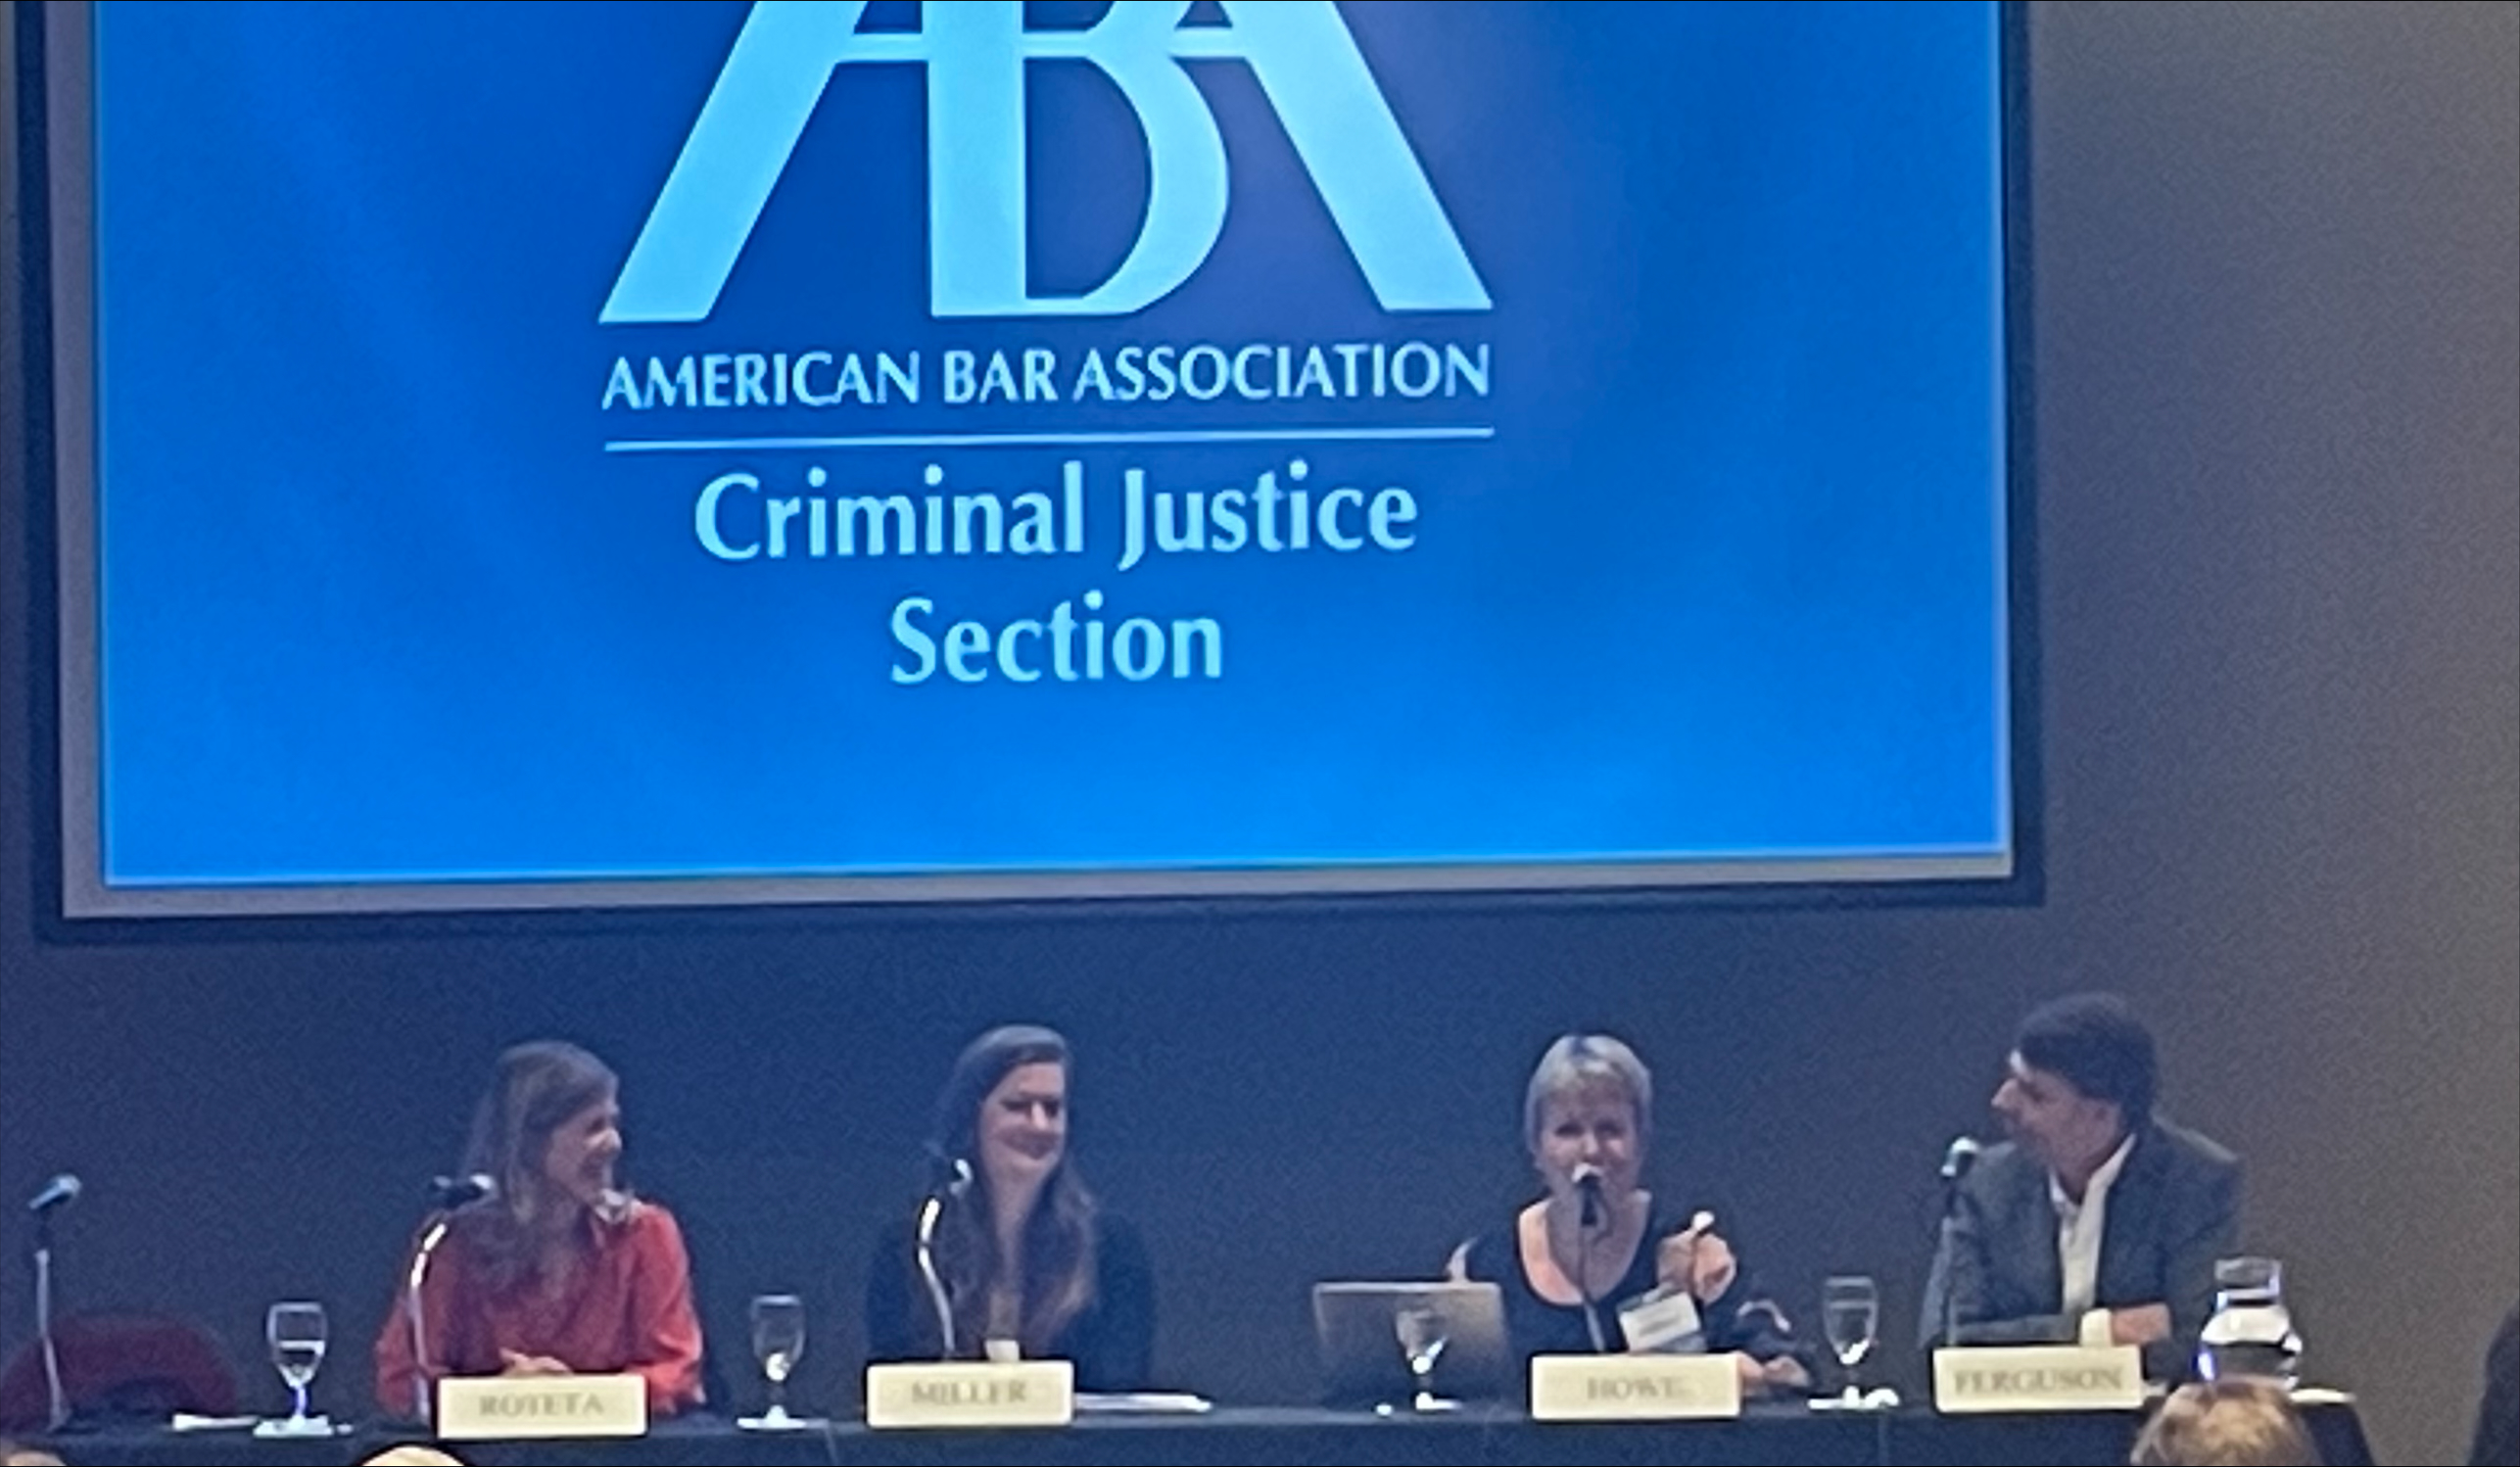 Laura Roteta, Lisa Miller and Russ Ferguson listen as Elizabeth Howe speaks during a panel discussion on enforcement trends and priorities.